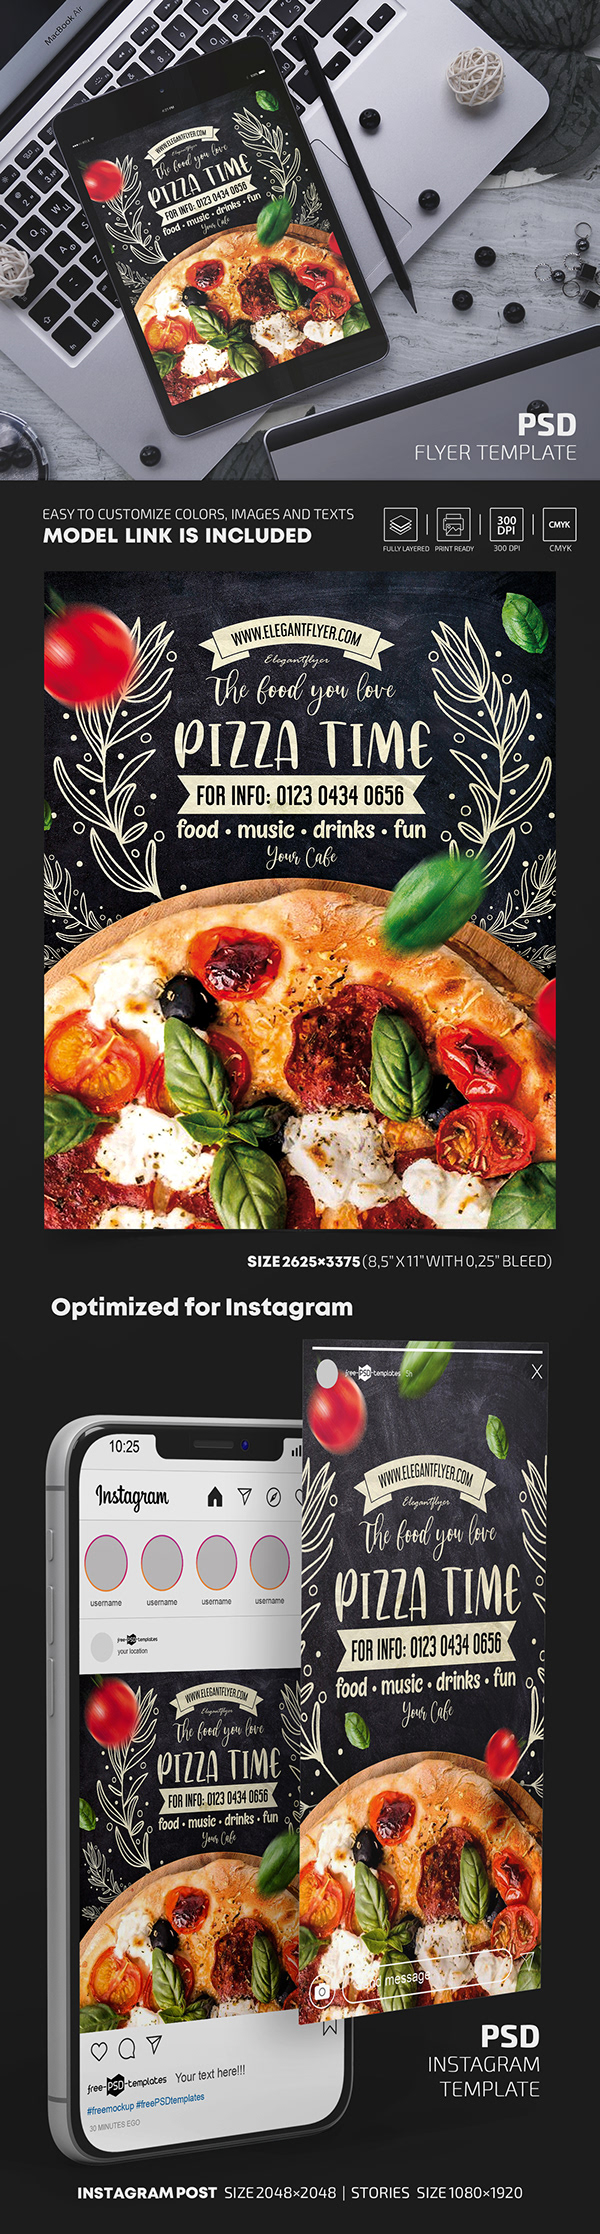 Pizza Time – PSD Flyer Template